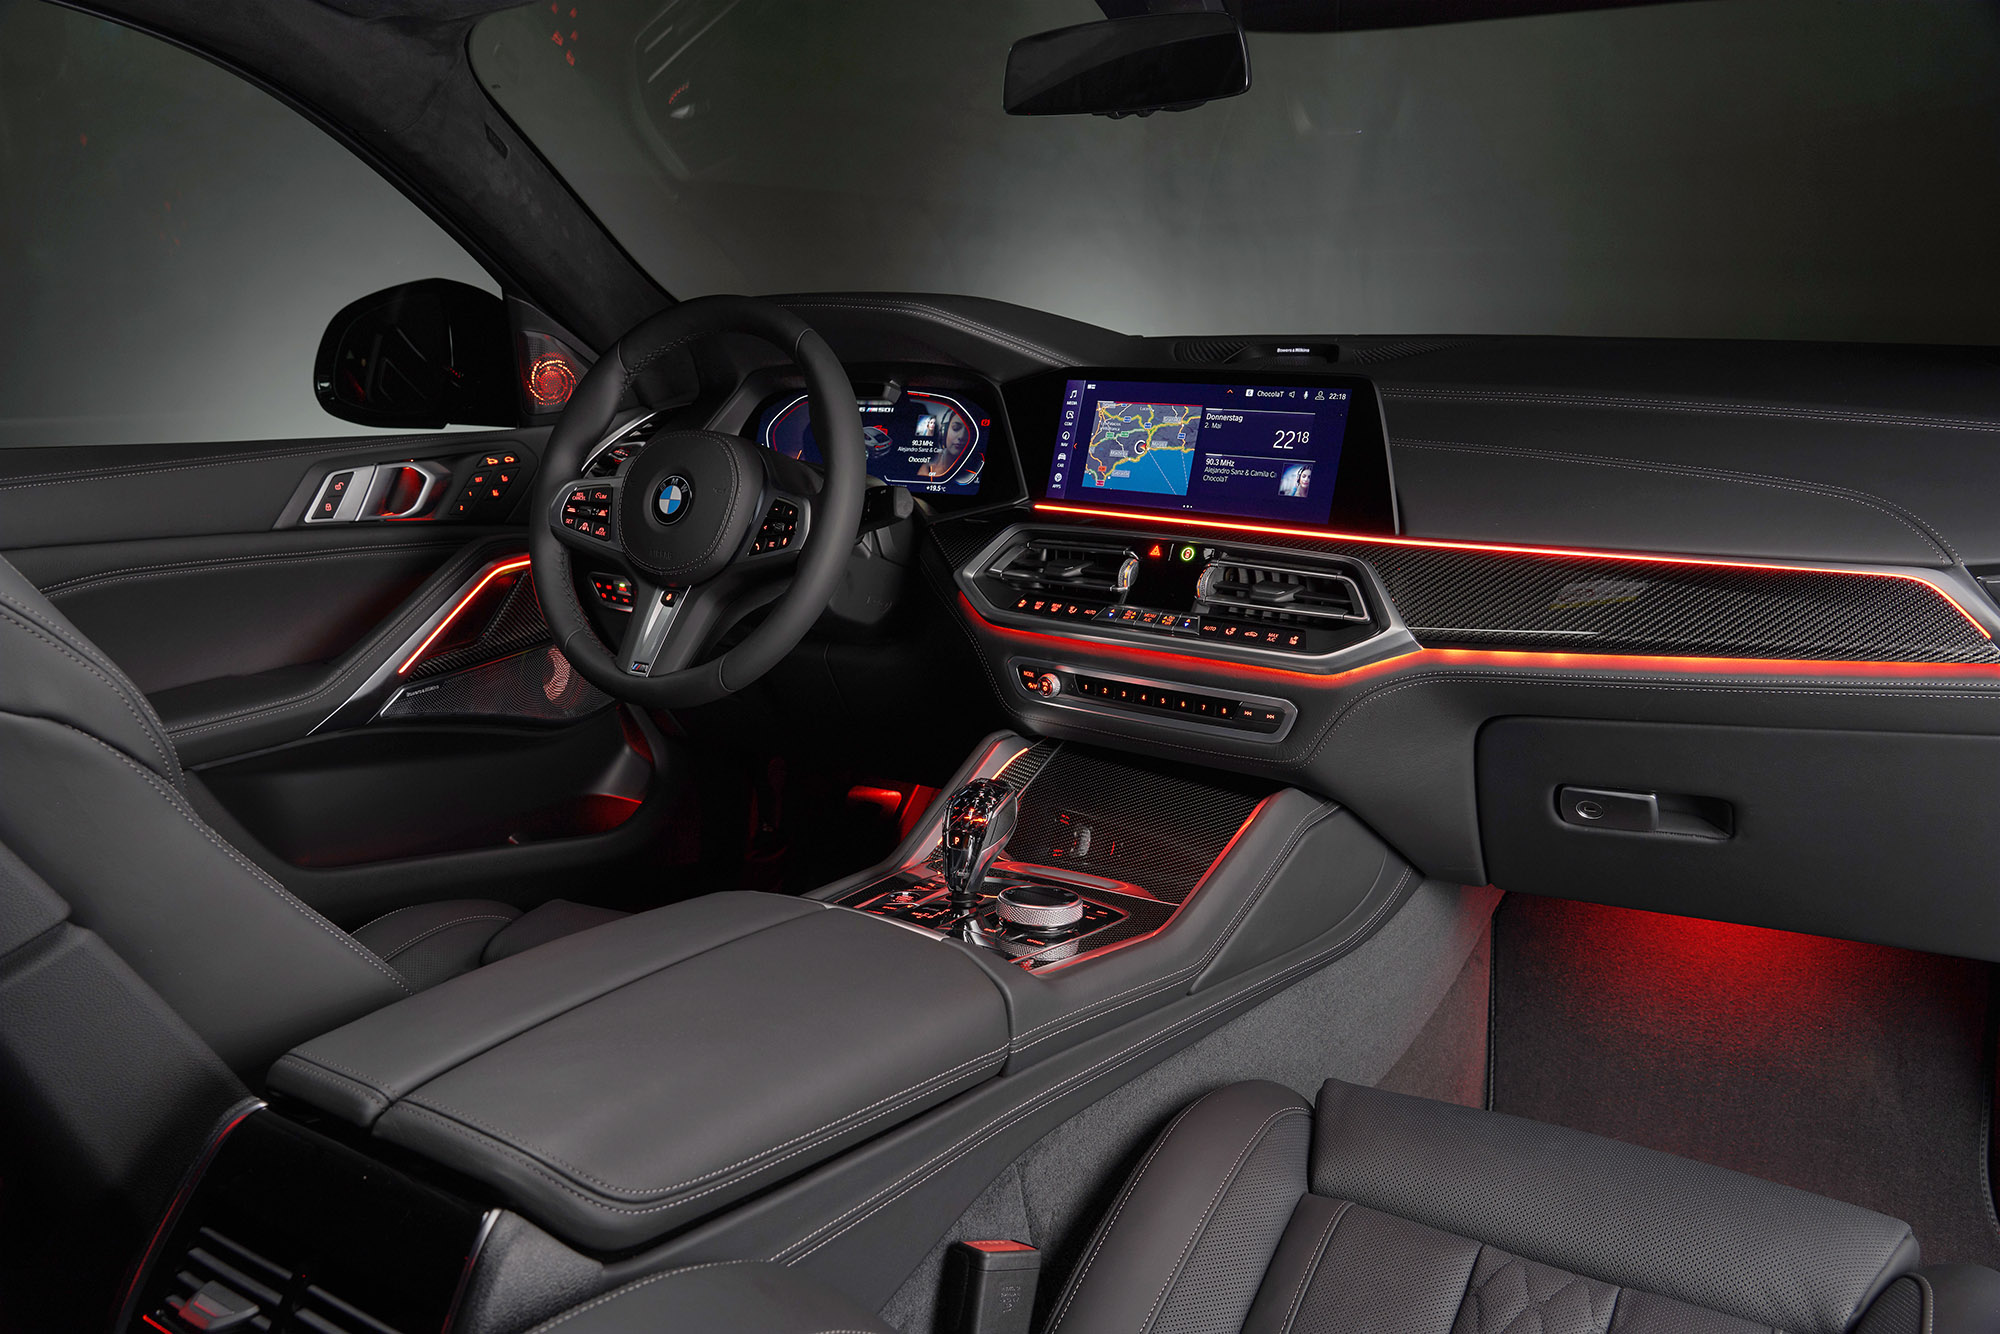 BMW X6 interior with ambient lighting